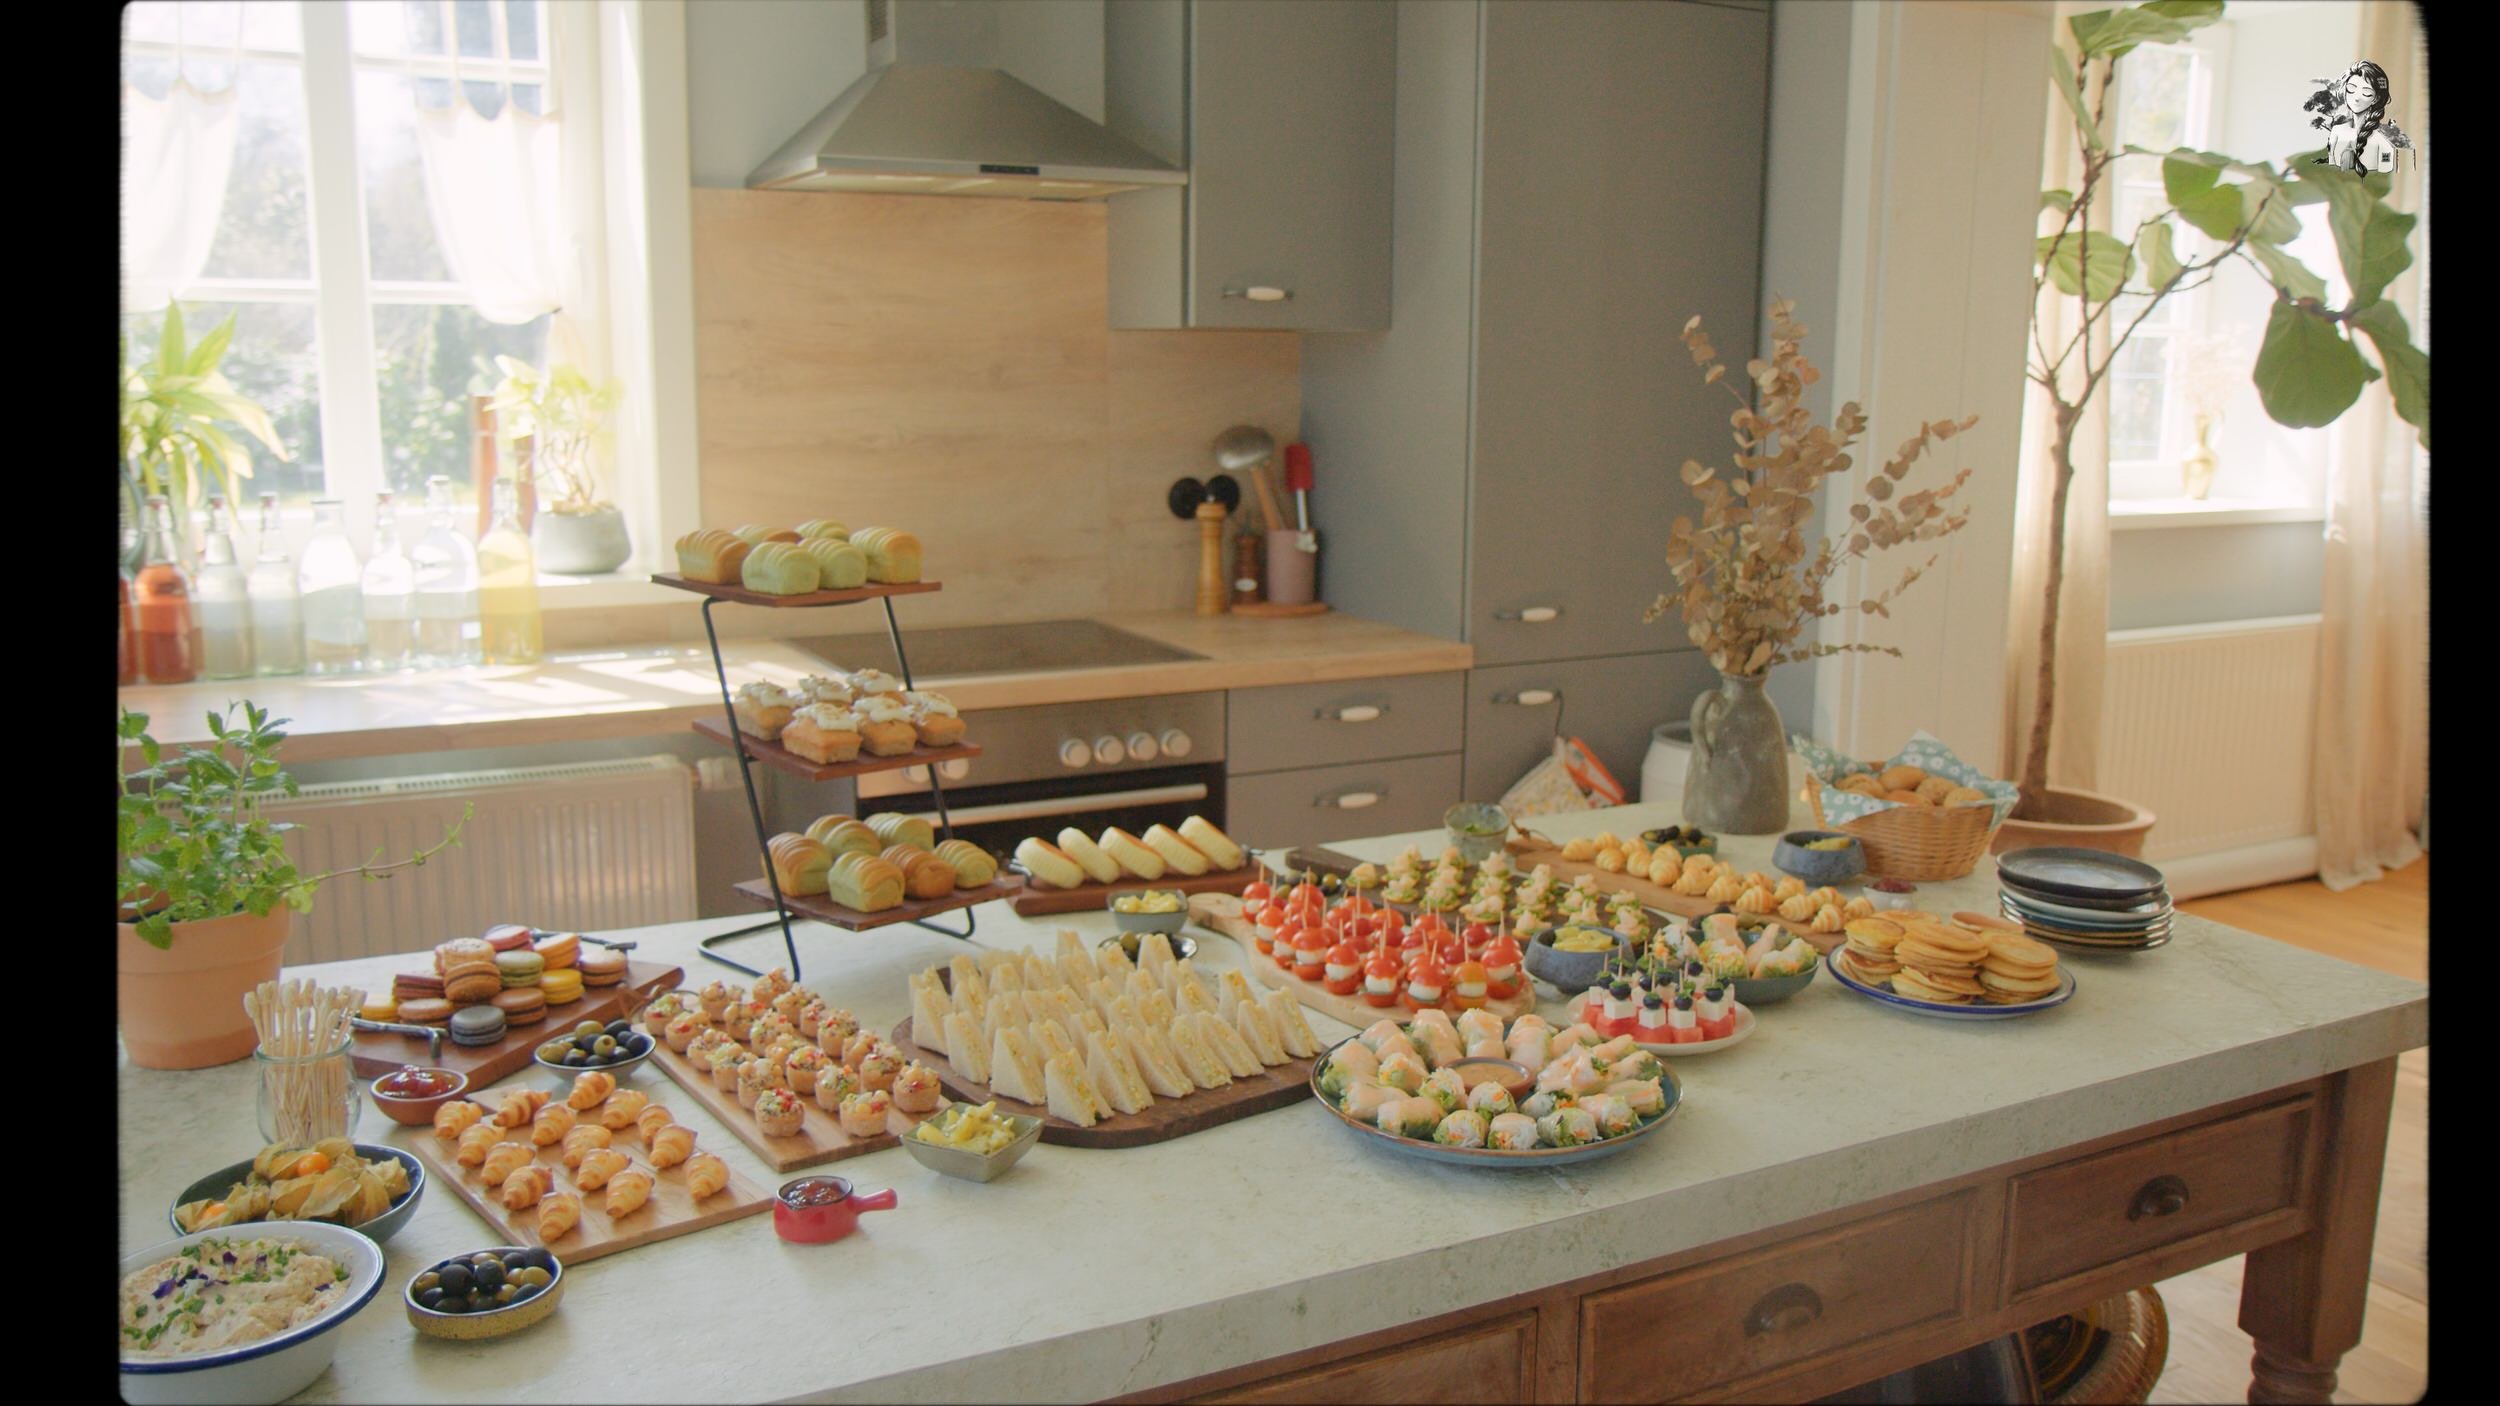 Small Bites Brunch Buffet Ideas for your next party - Her86m2 _1.257.1.jpg